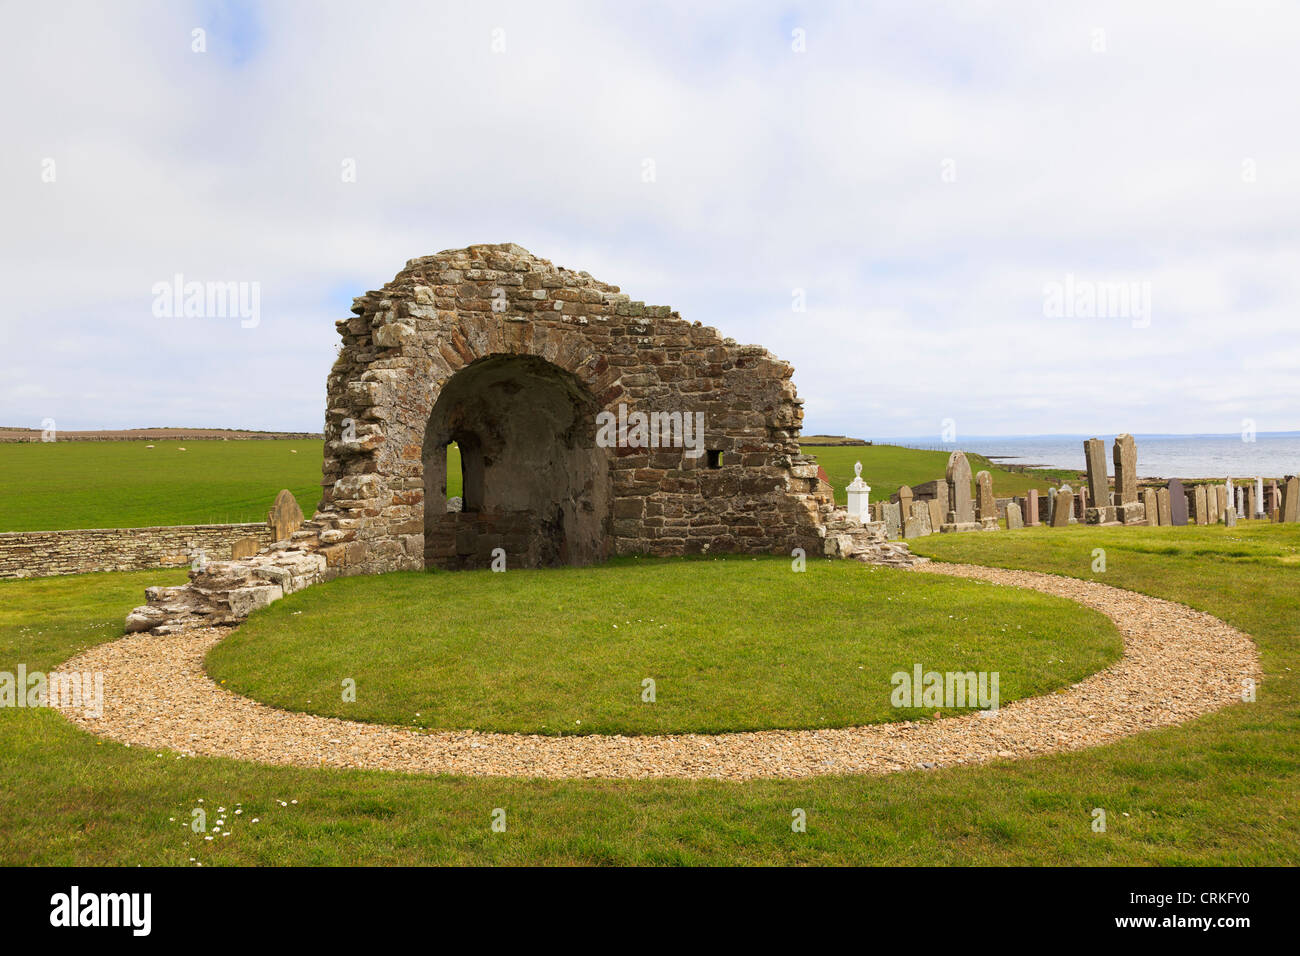 Ruins of 12th century Round Kirk (church of St Nicholas) at Orphir, Orkney Islands, Scotland, UK. Stock Photo